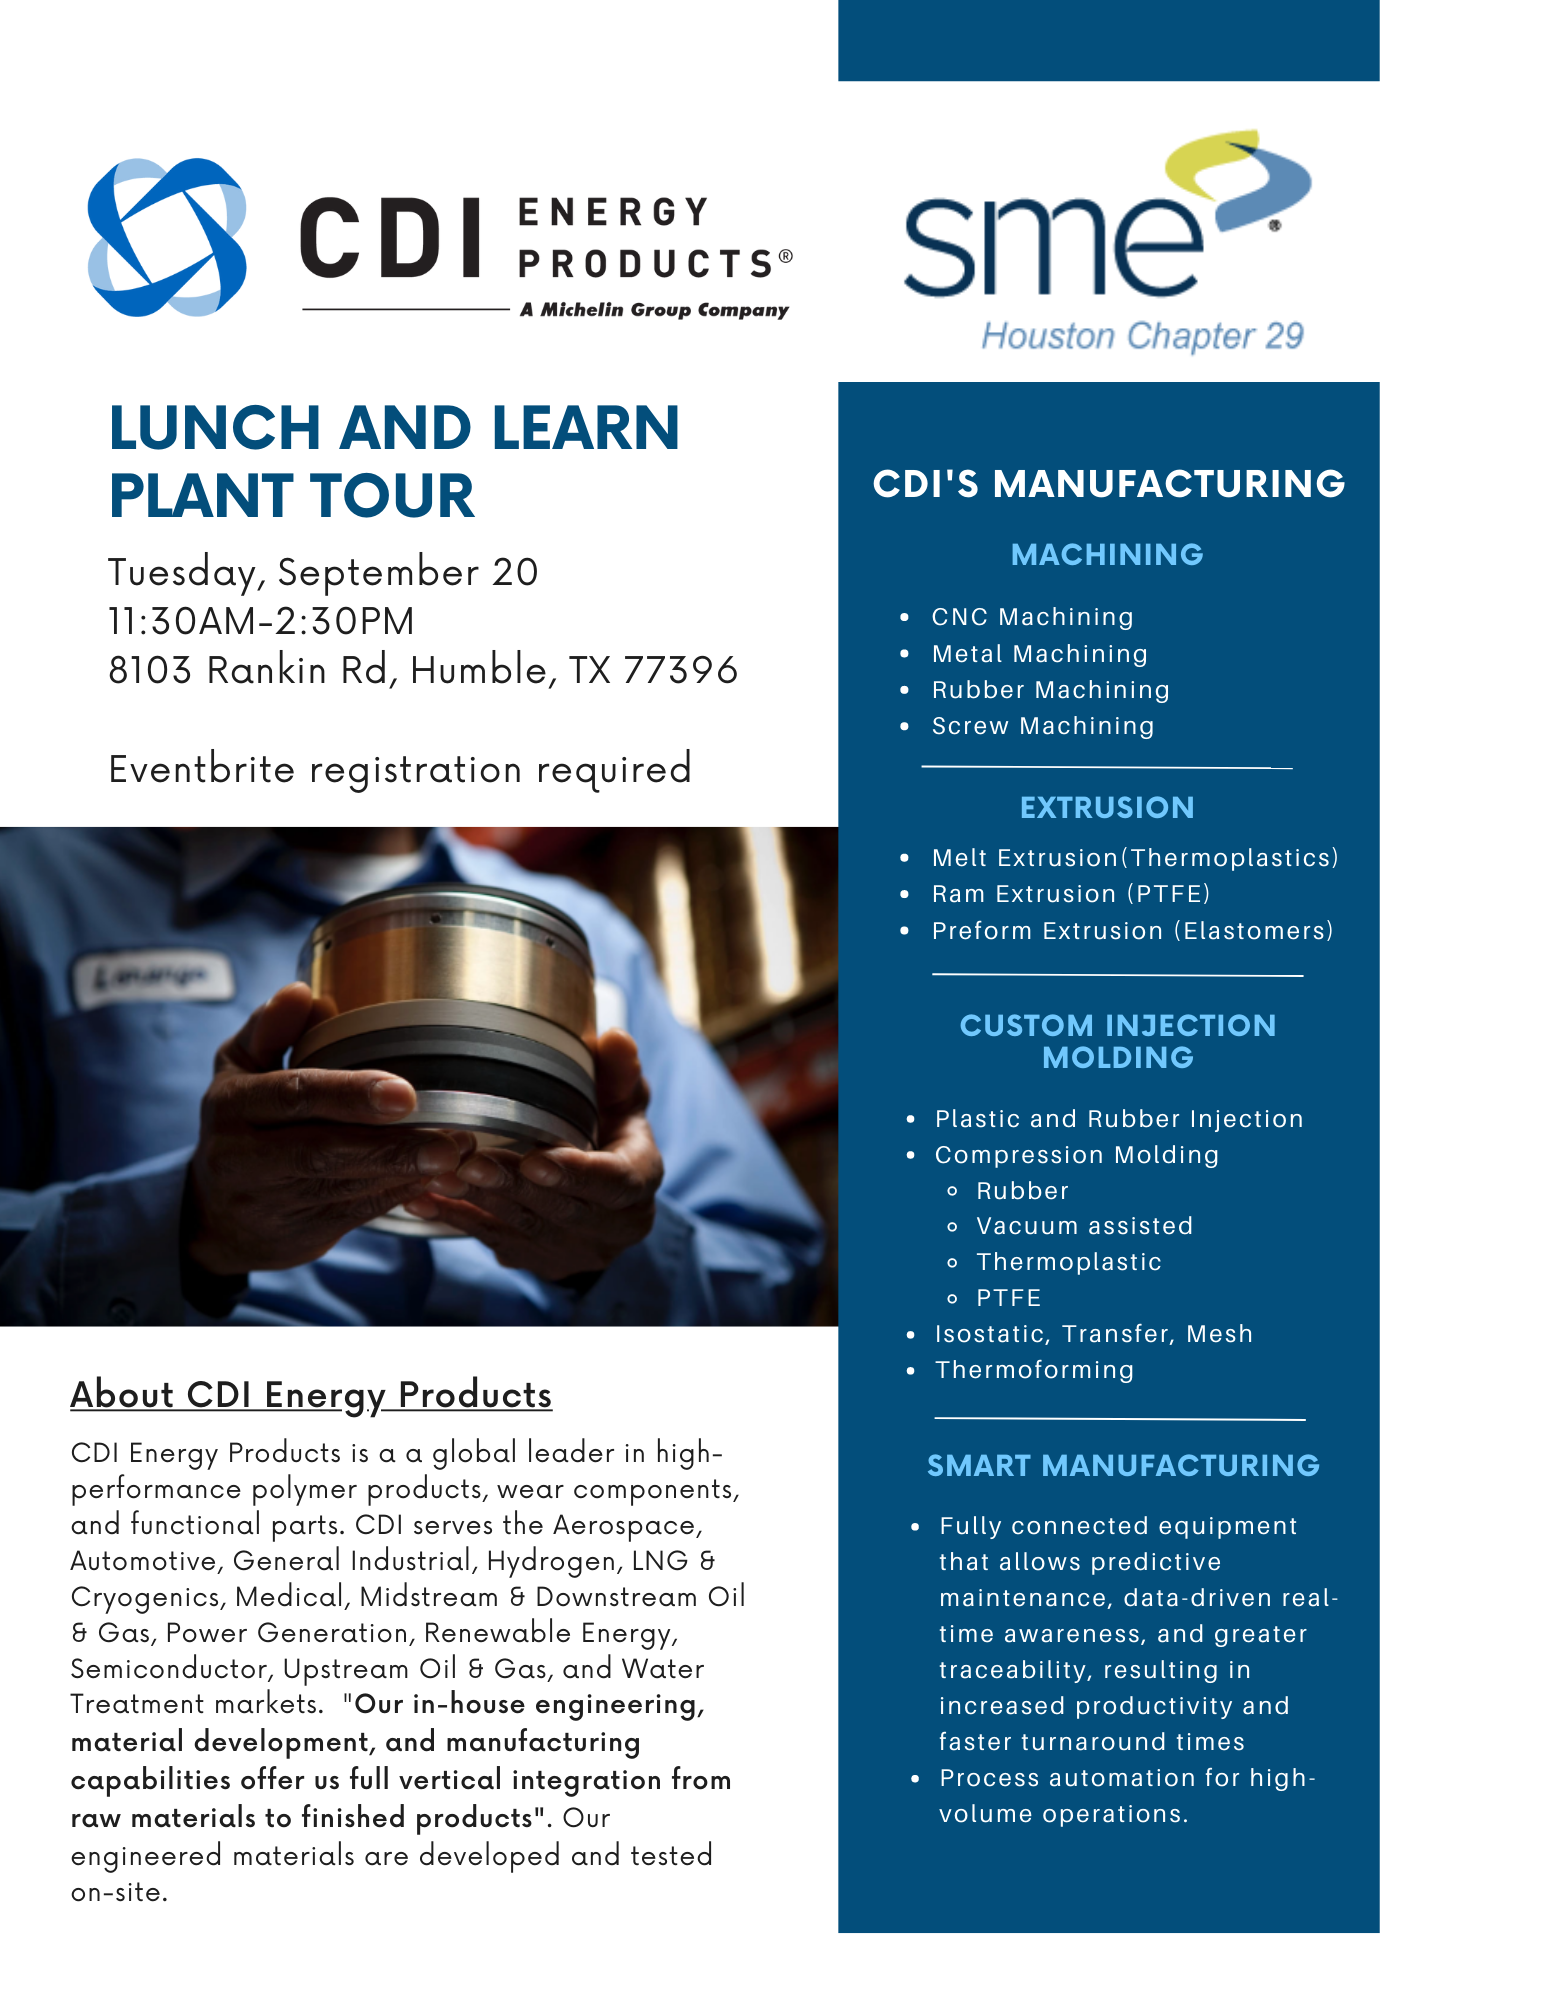 CDI Energy Products Lunch & Learn Plant Tour 1249